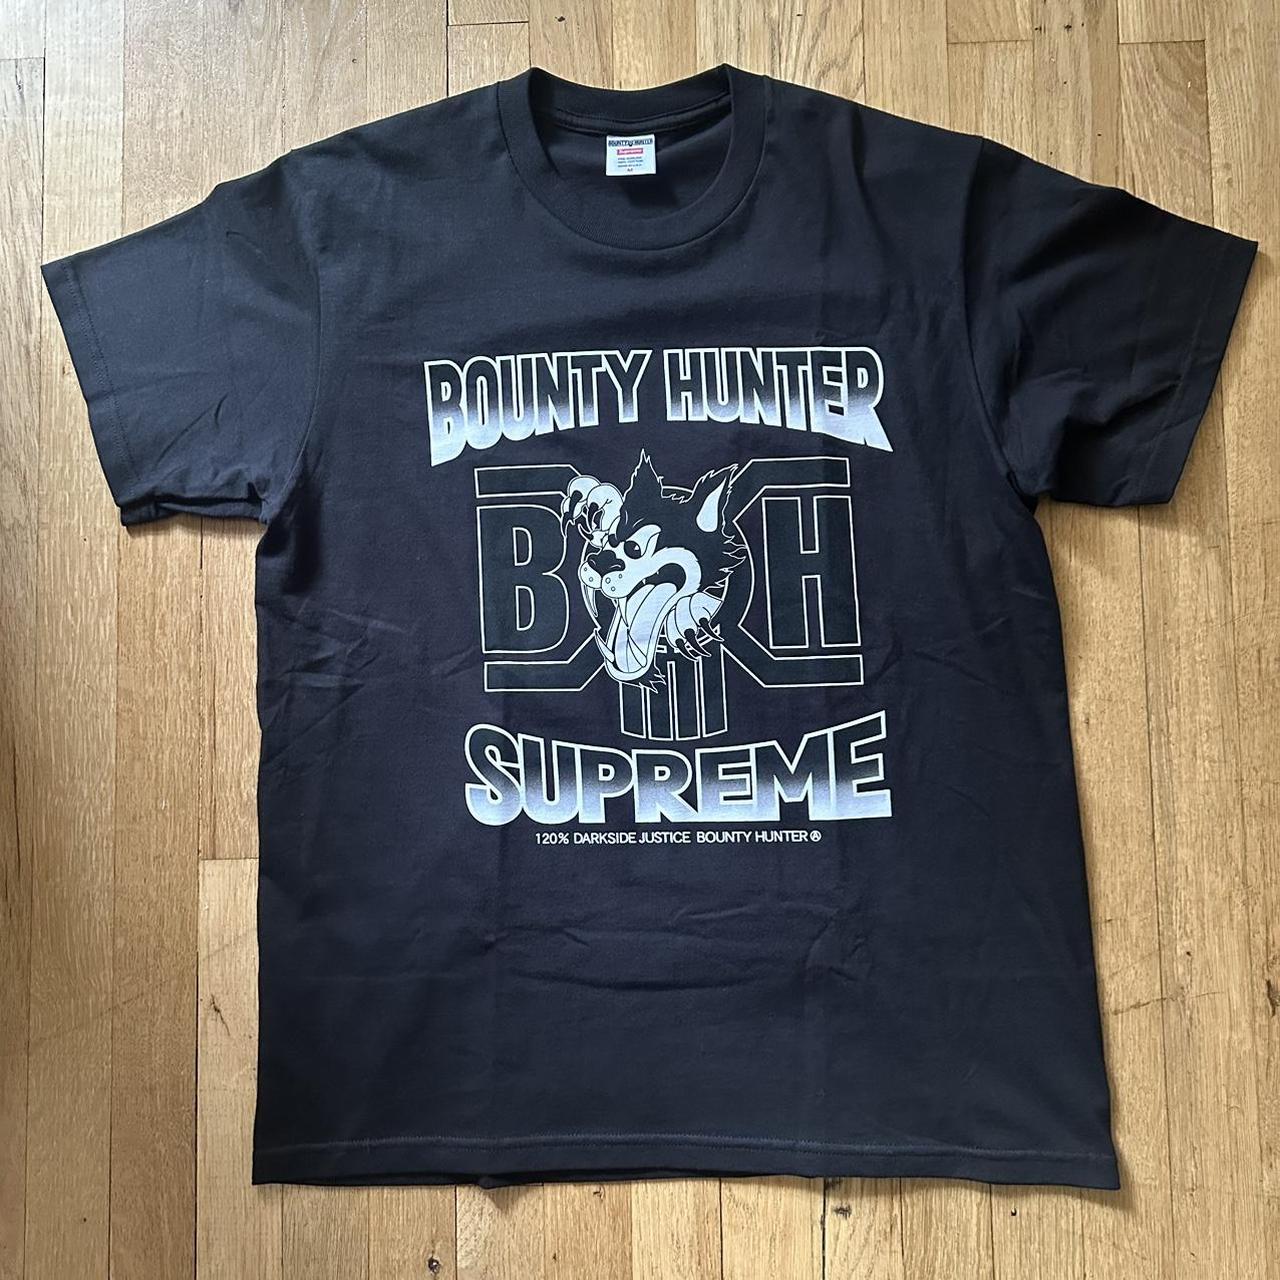 Supreme x Bounty Hunter Wolf Tee, Worn once to try...